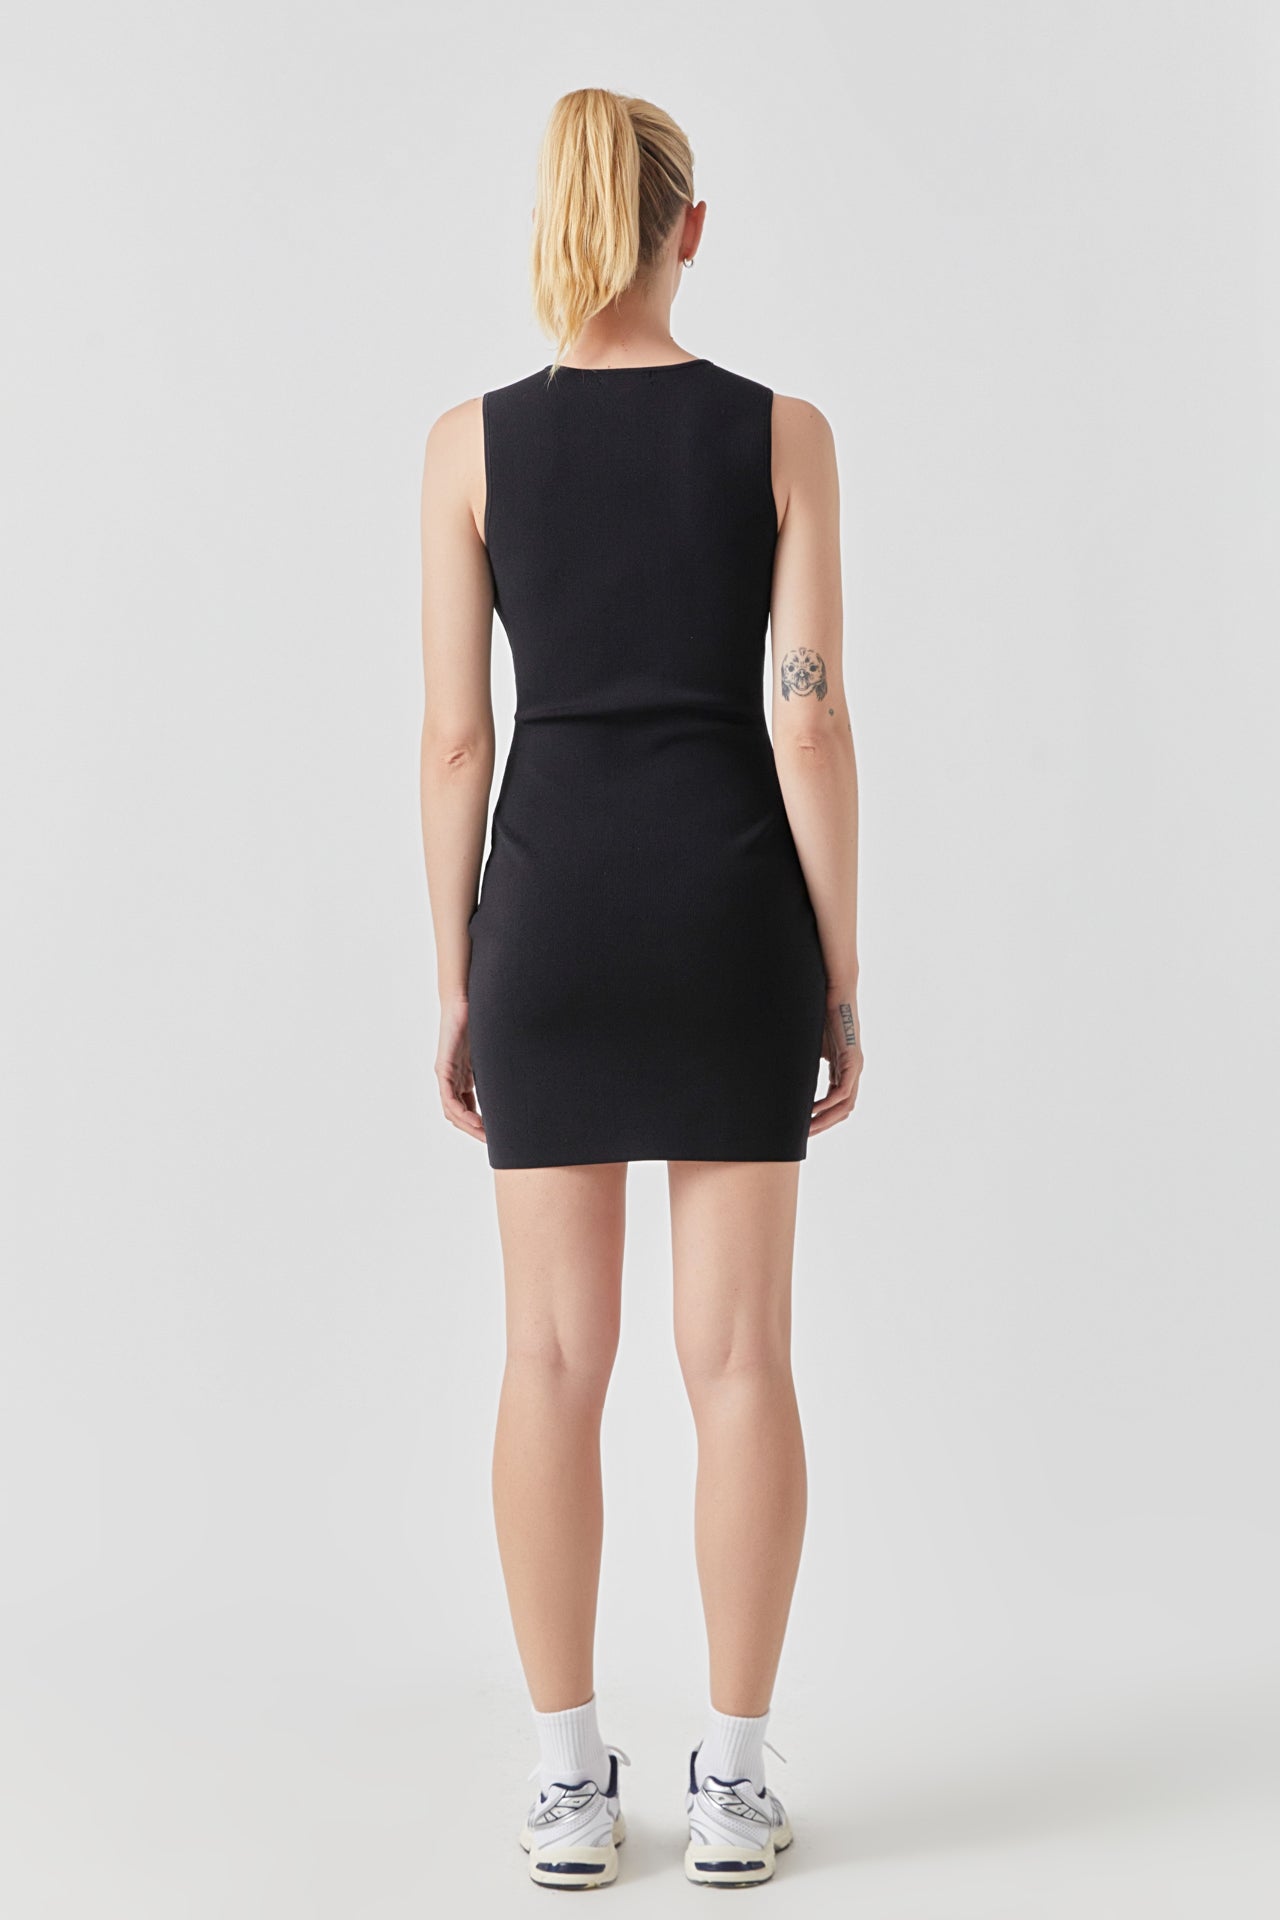 GREY LAB - Front Zip Sleeveless Knit Mini Dress - DRESSES available at Objectrare